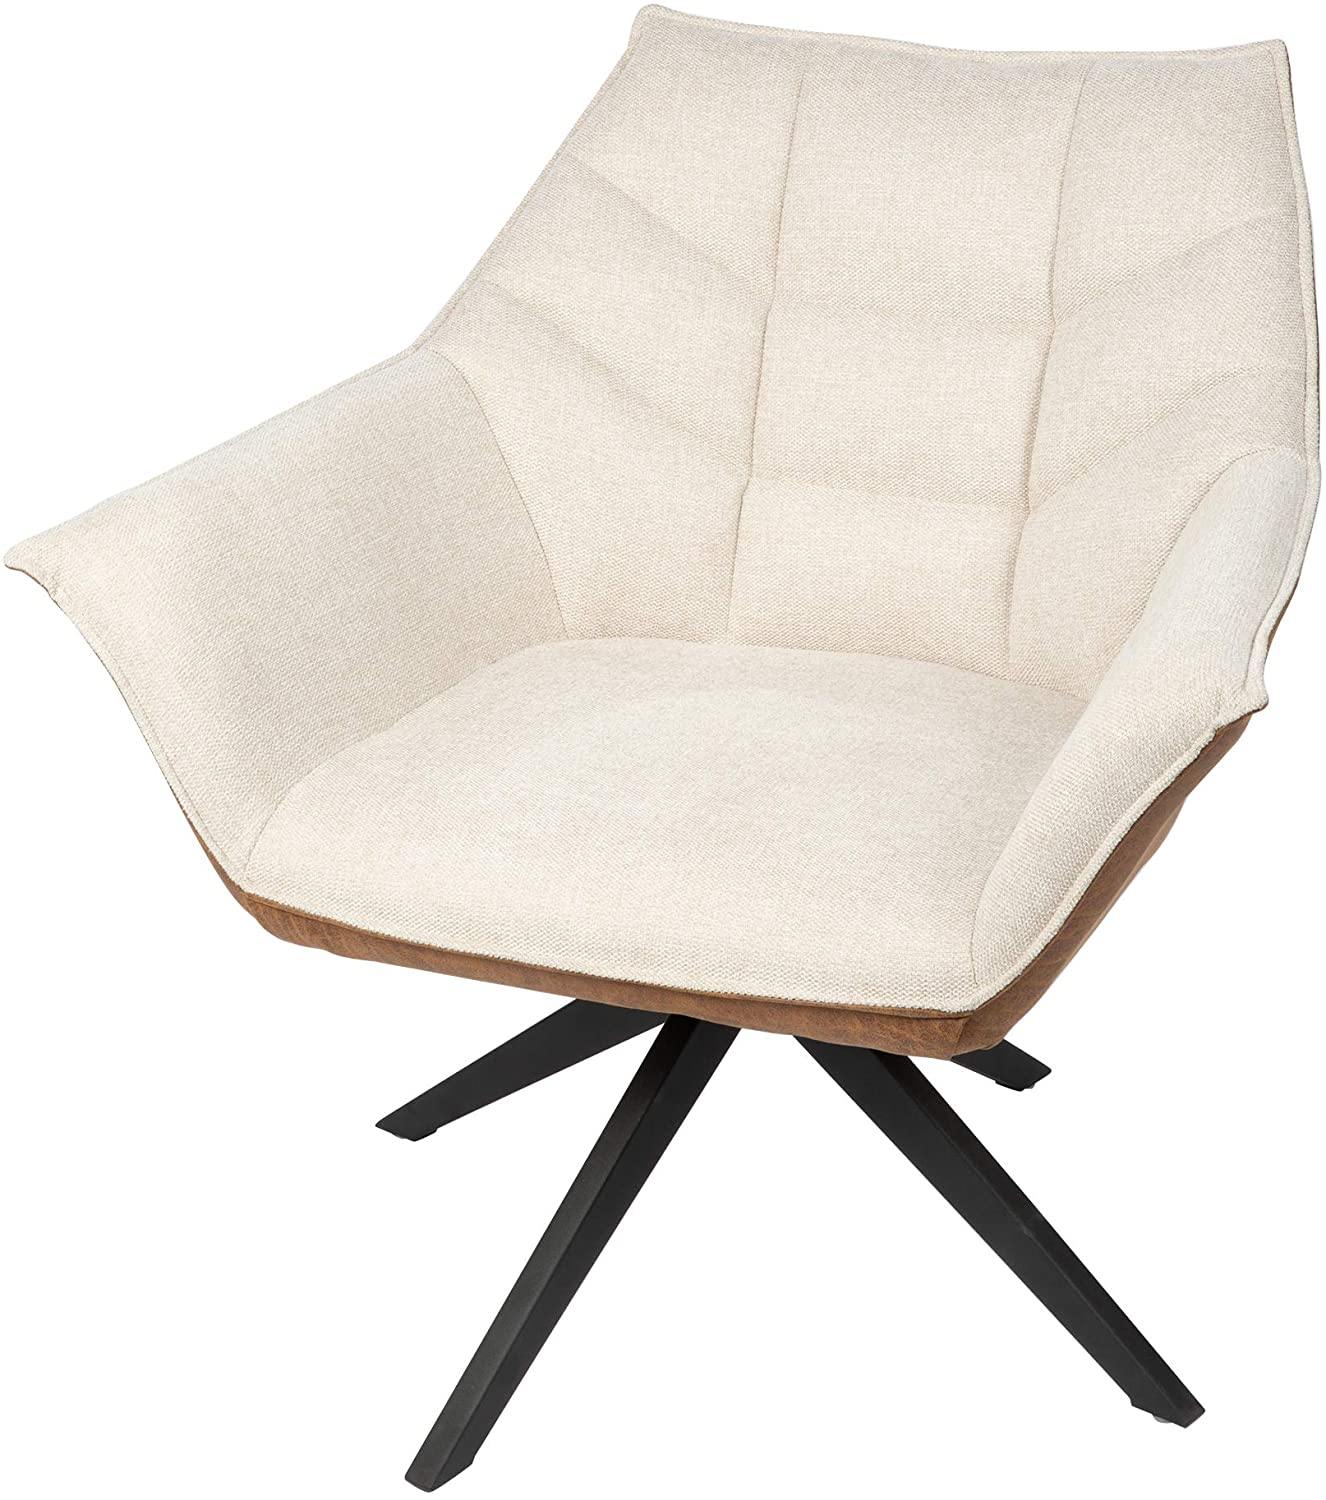 Set of 2 Swivel Armchair Accent Fabric Modern Chair With Upholstered Seat & Metal Leg, Beige - Bosonshop